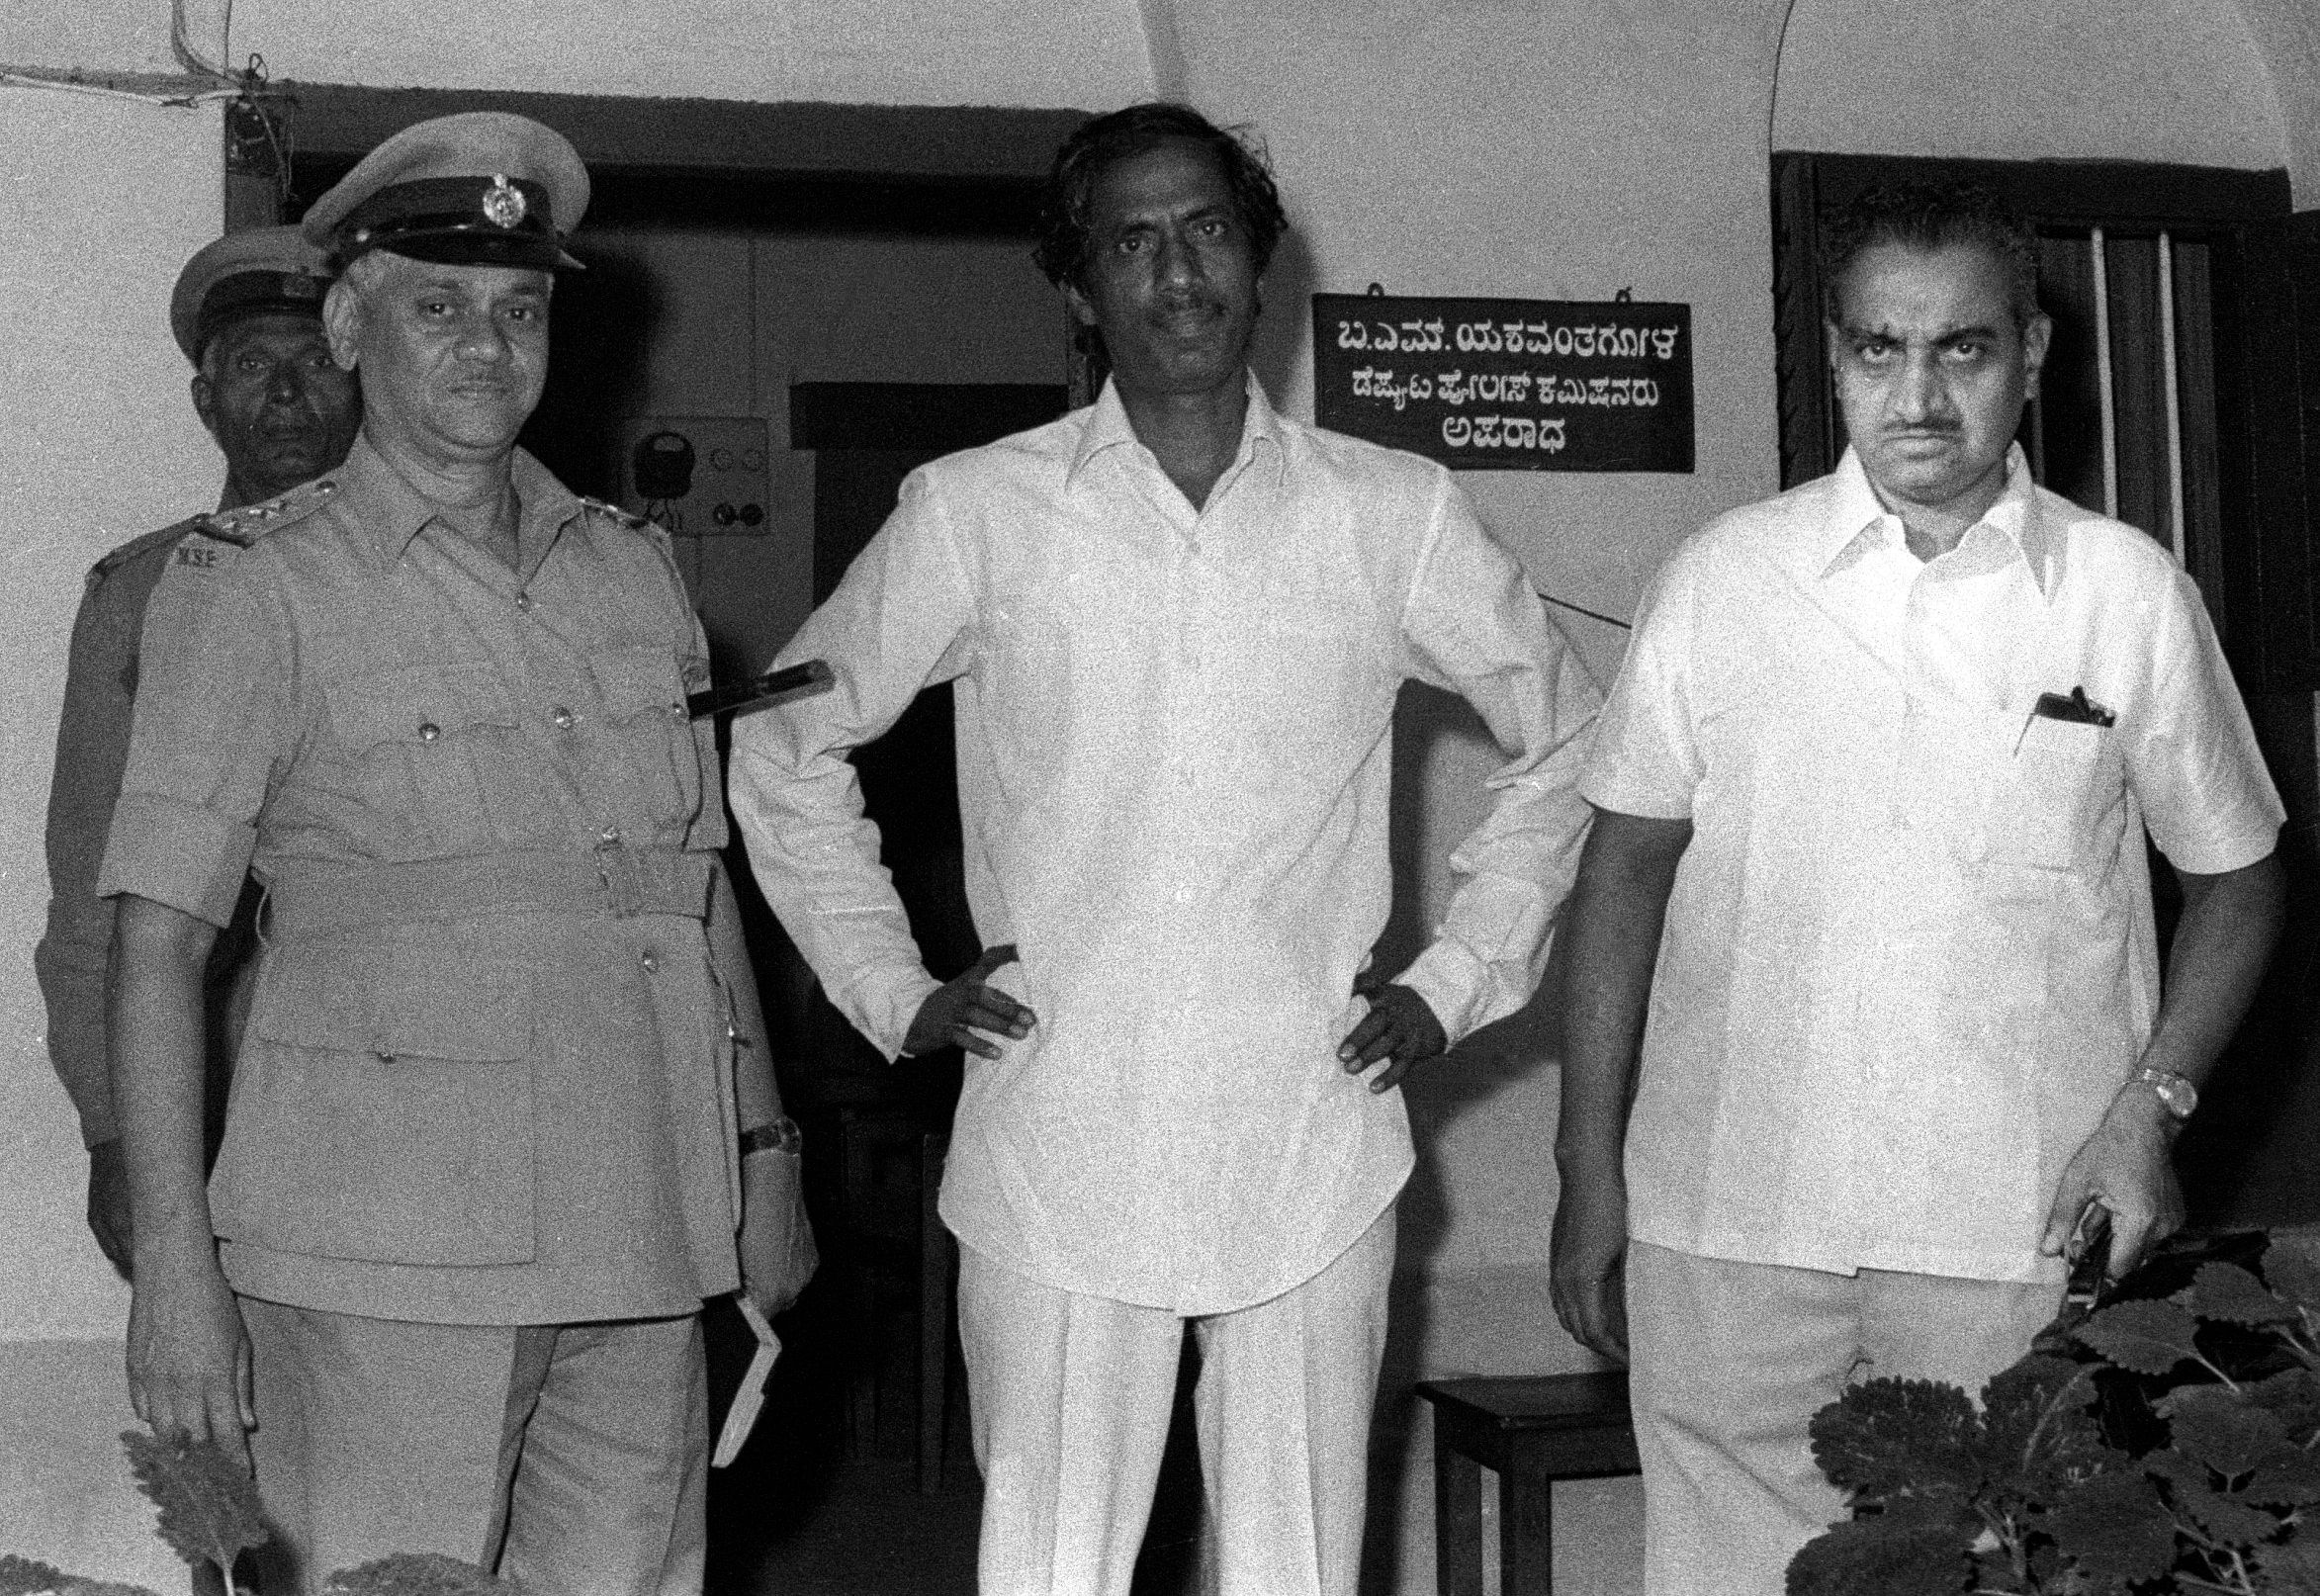 Haji Mastan Mirza (centre) in police custody on Sept. 18, 1974. He was arrested on smuggling charges by Bangalore police. Credit: DH Archives